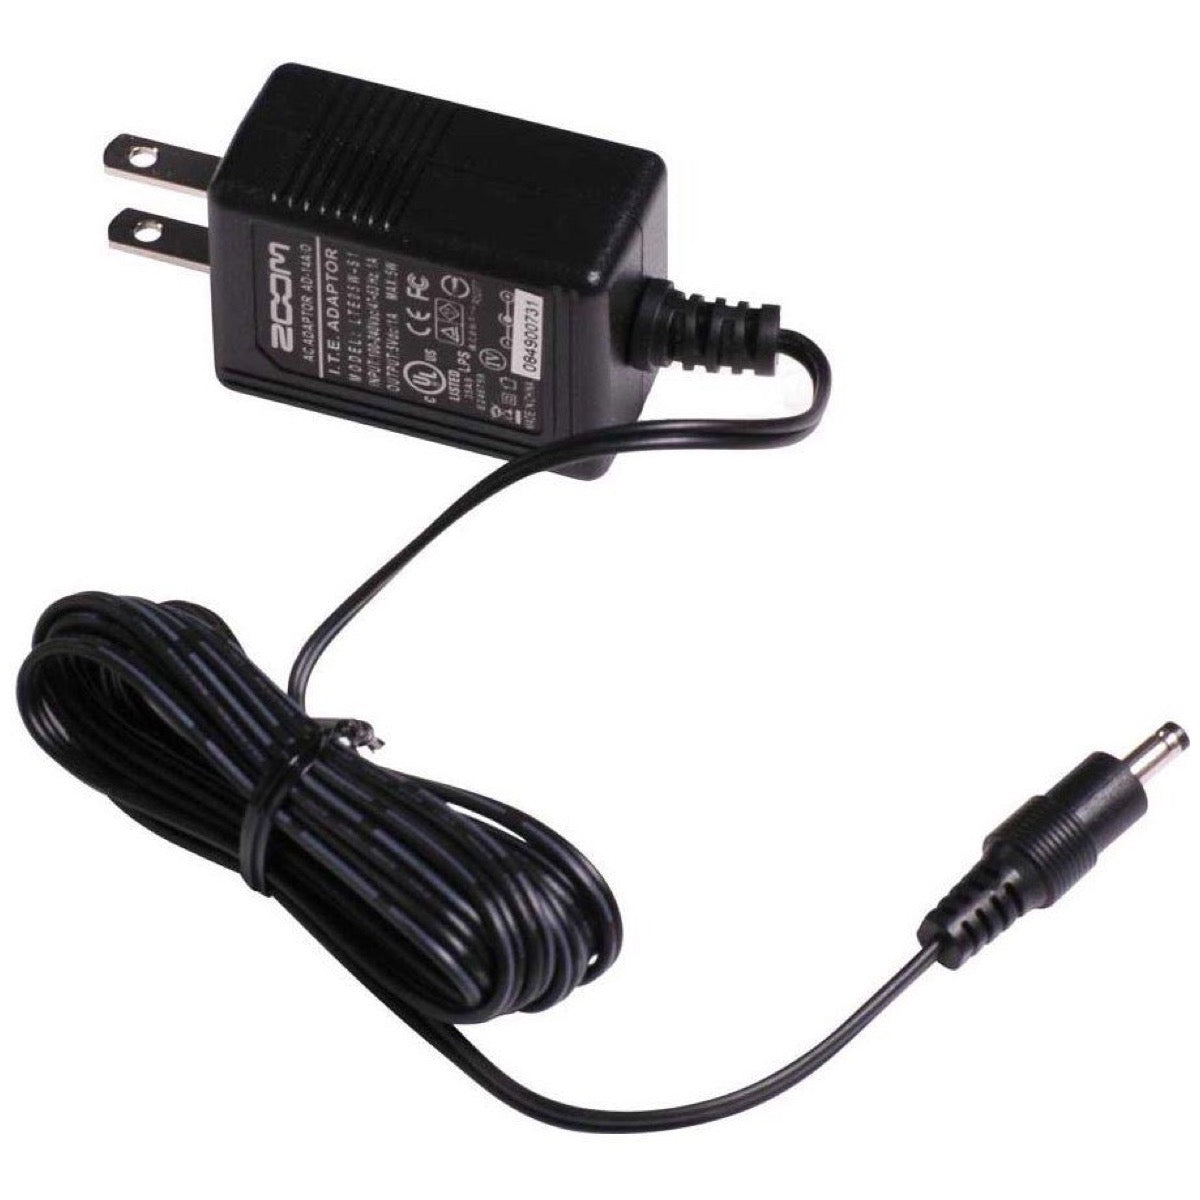 Zoom AD14 Power Supply for Q3, H4n, and R16 Recorders